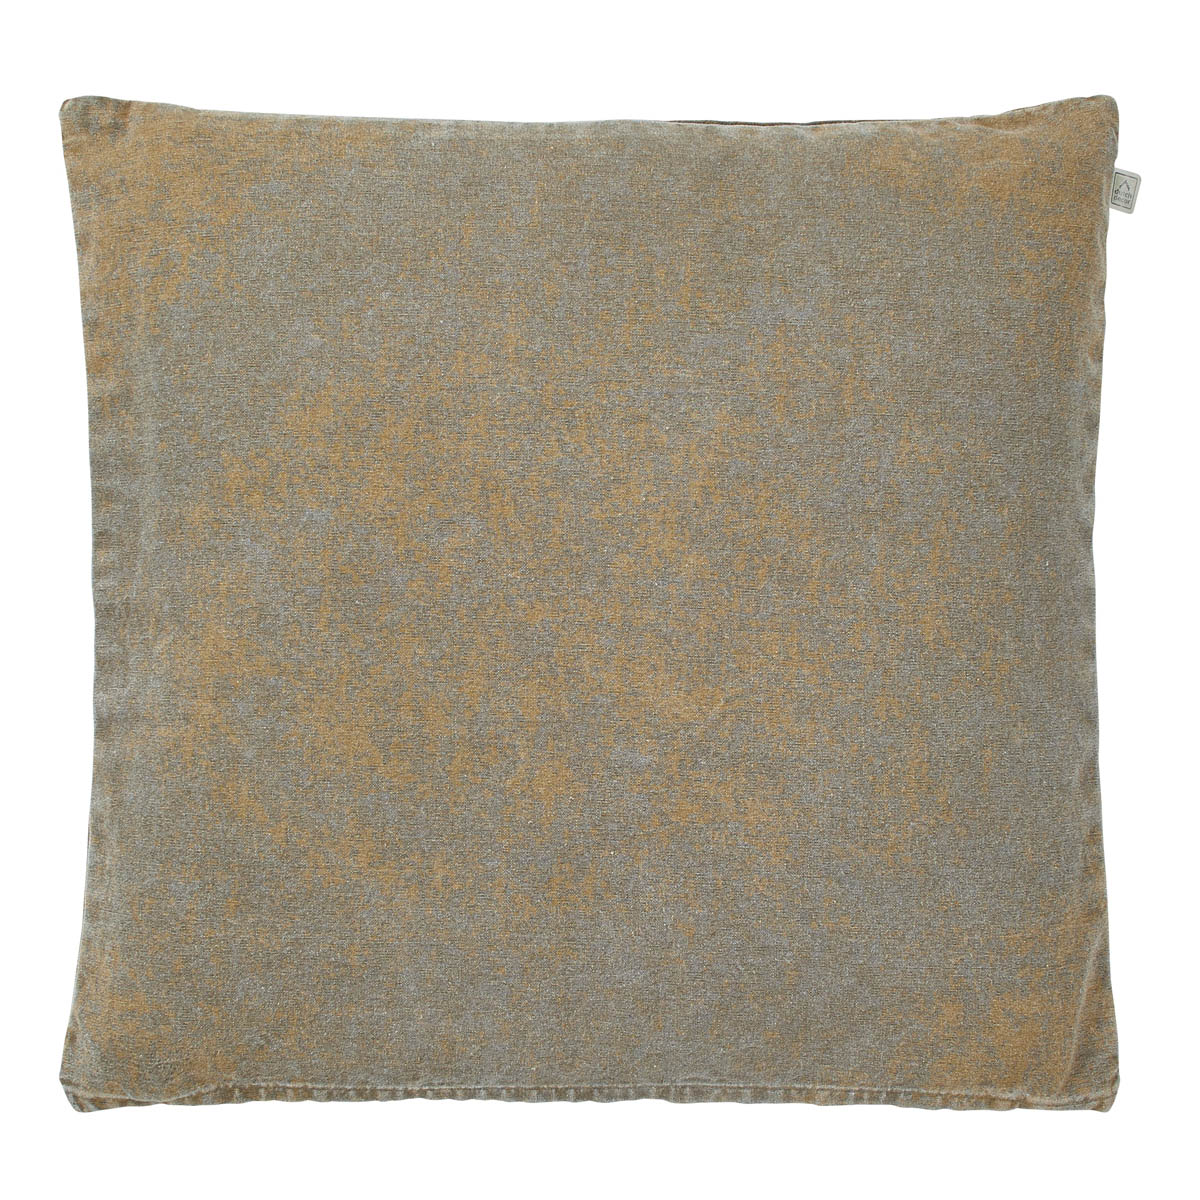 RAMERCO - Kussenhoes taupe 50x50 cm